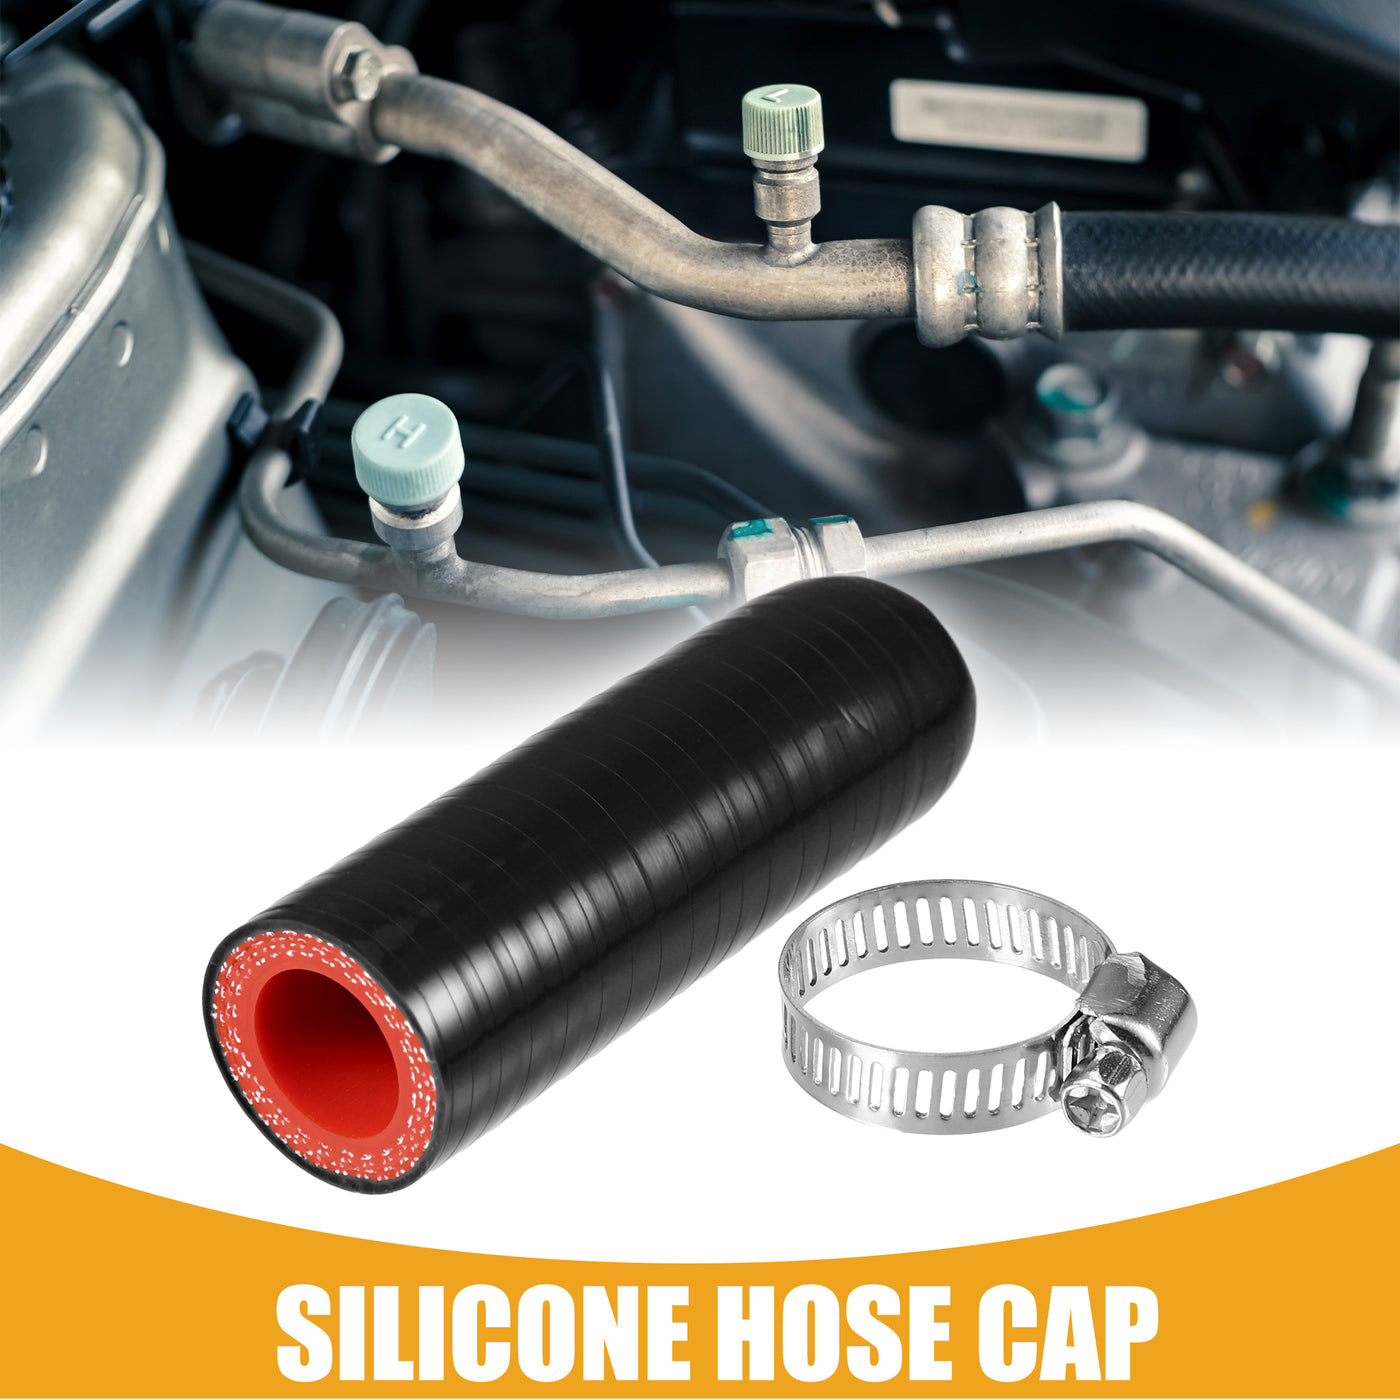 Partuto 1 Set 16mm 0.63" ID Universal Silicone Coolant Cap Intake Vacuum Hose End Plug - Car for Coolant Heater Bypass Vacuum Water Port - Silicone Black Red